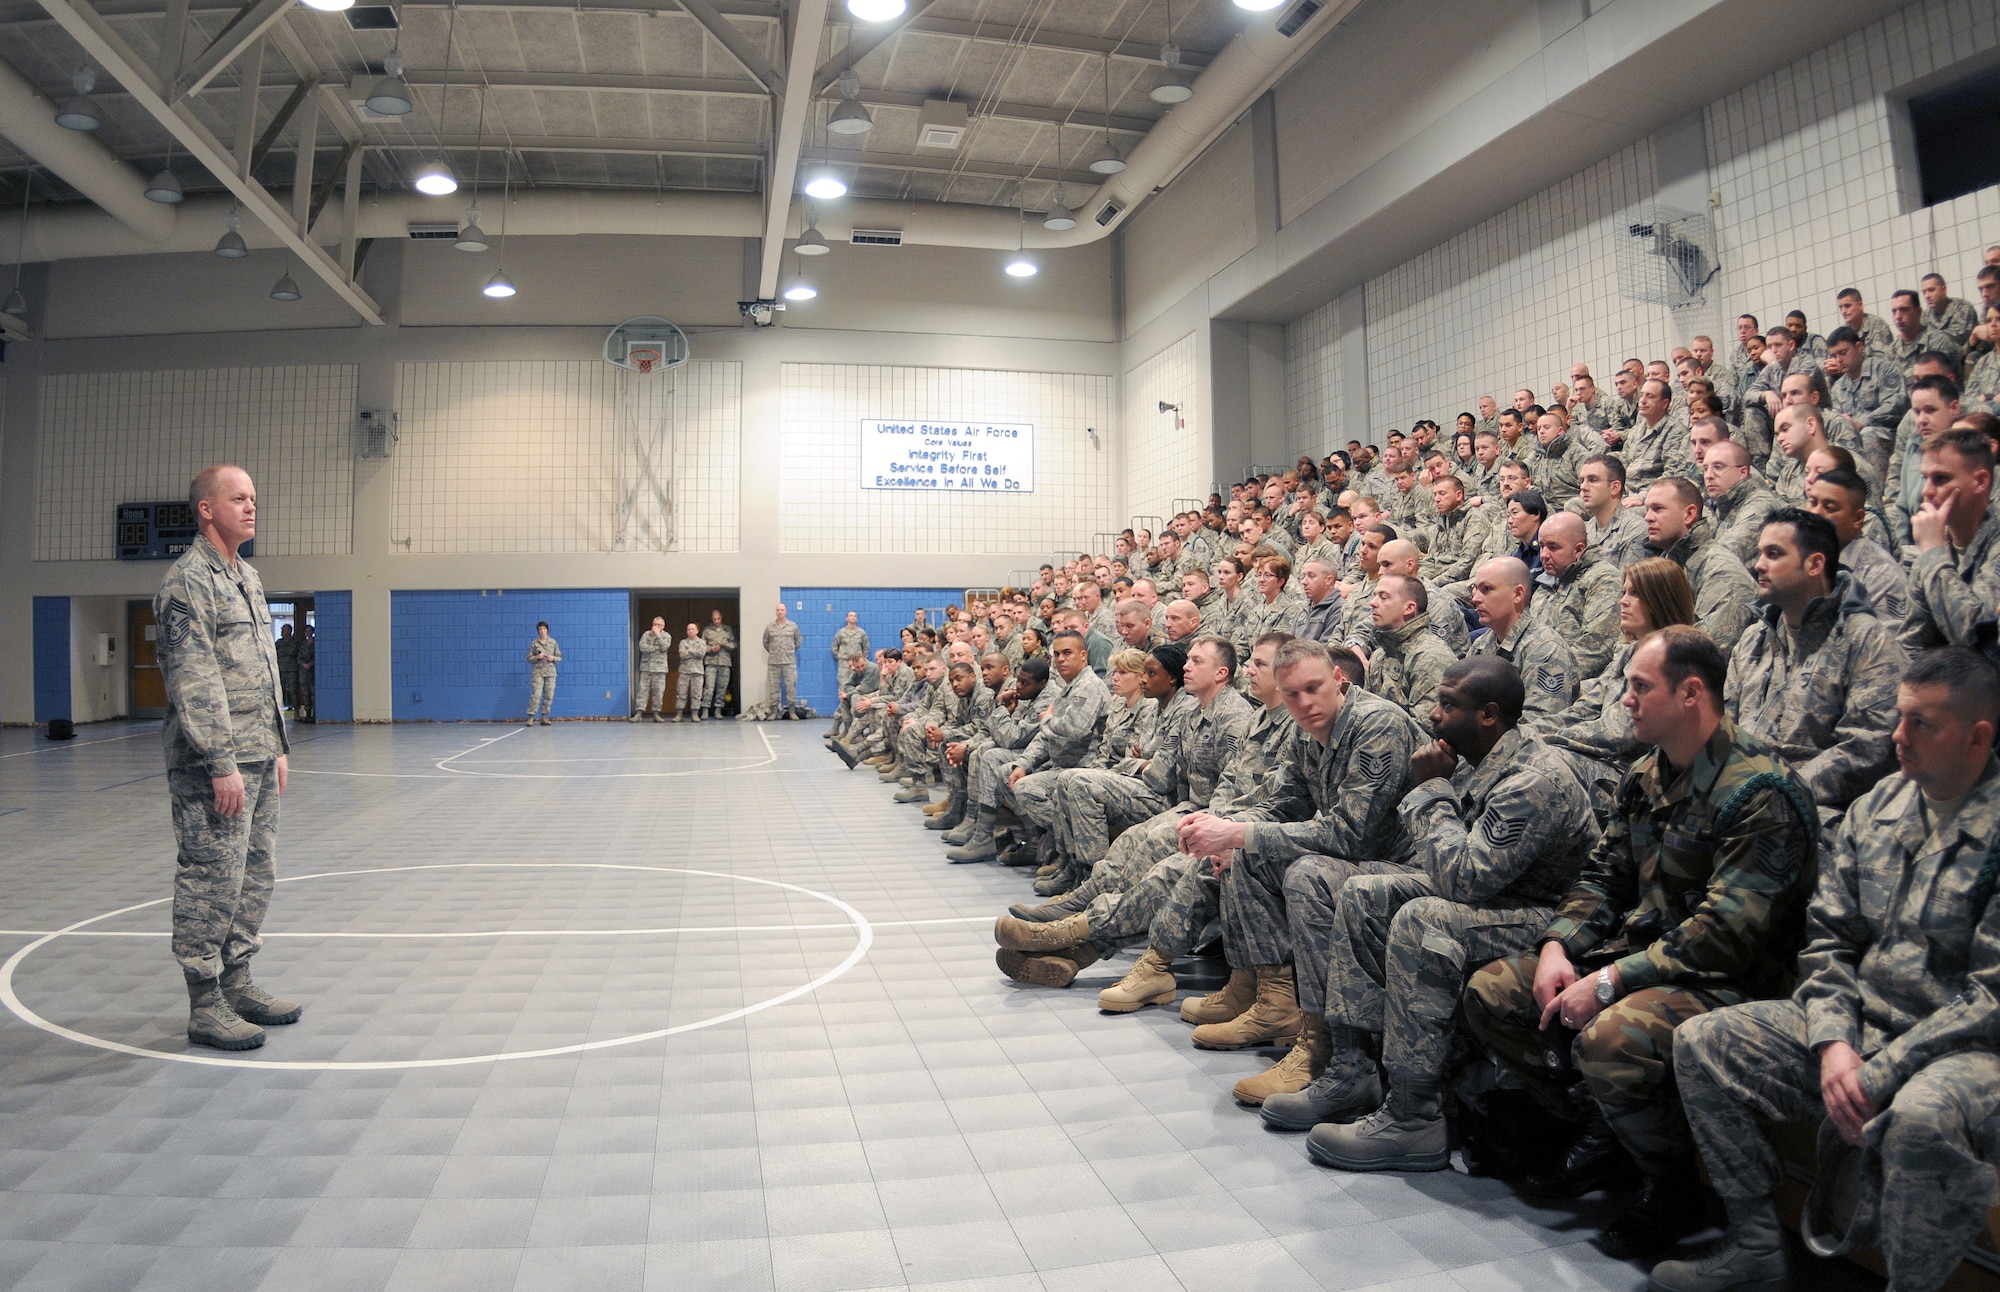 McGHEE TYSON AIR NATIONAL GUARD BASE, Tenn. -- Air National Guard Command Chief Master Sgt. Chris Muncy addresses more than 260 service members attending the Noncommissioned Officer Academy Class 10-4 and the Airman Leadership School Class 10-2 at The I.G. Brown Air National Guard Training and Education Center here, March 3, 2010. (U.S. Air Force photo by Master Sgt. Kurt Skoglund/Released)